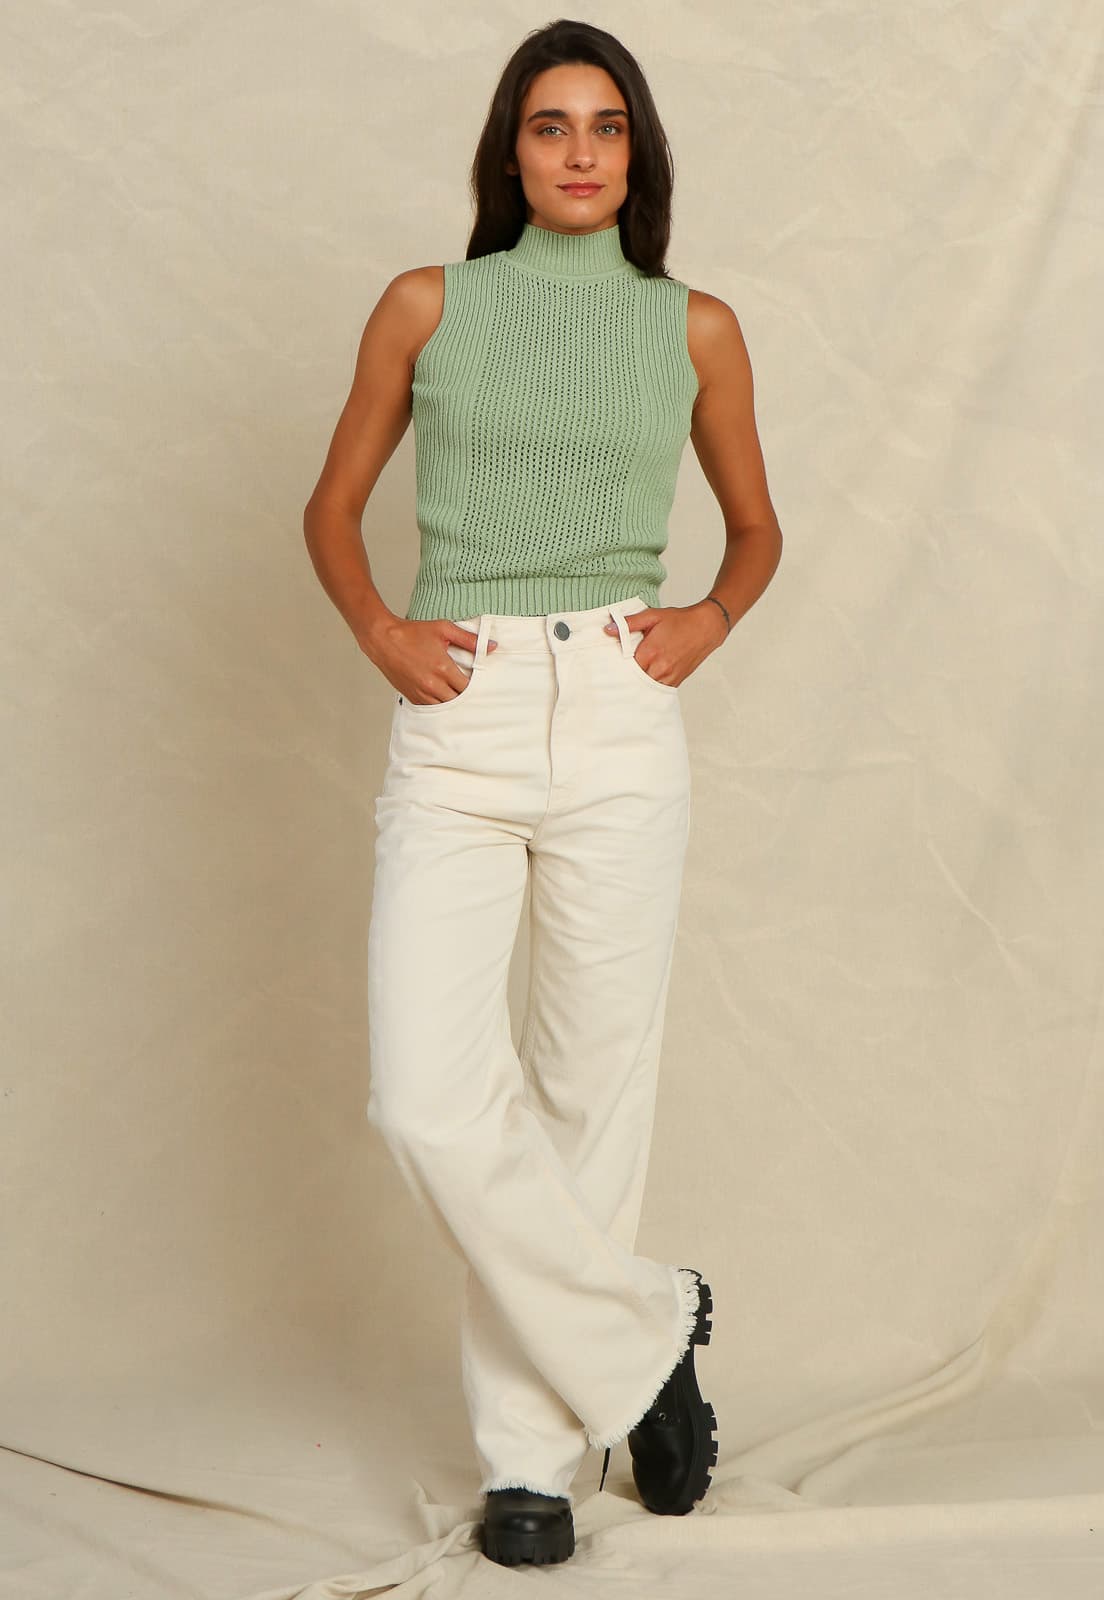 19601-BLUSA-CROPPED-TRICOT-VERDE-MATCHA_5